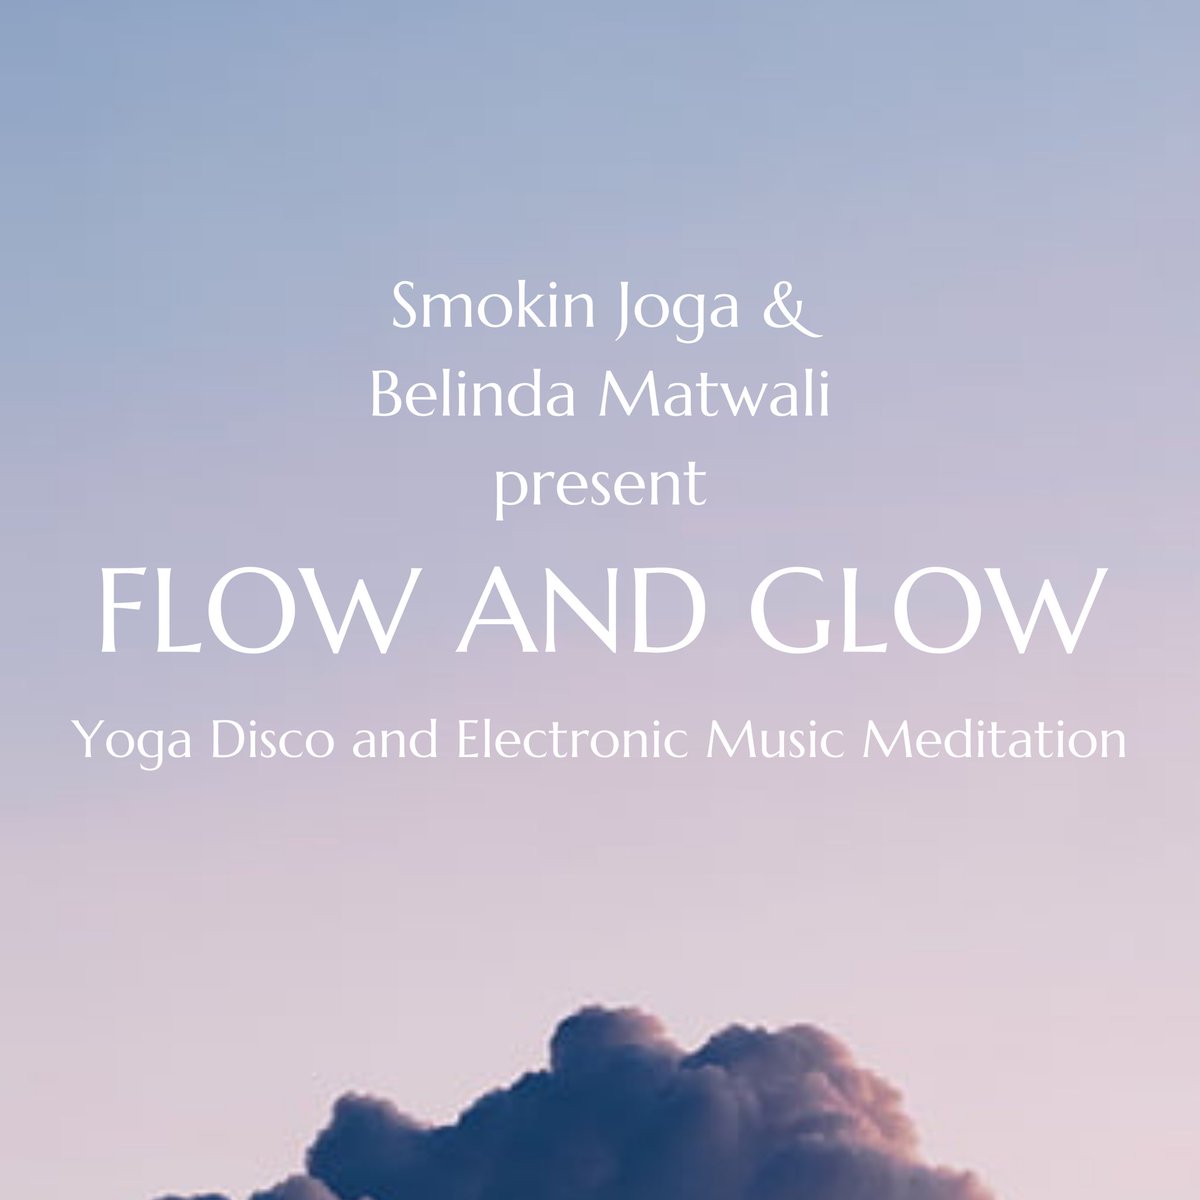 Hello friends, Join myself and Belinda Matwali for FLOW & GLOW a two hour magical session of Dynamic Vinyasa Flow set to my DJ mix of Deep House and Disco moving into Belinda's epic Electronic Music Mediation book here: bit.ly/3u8YW2u